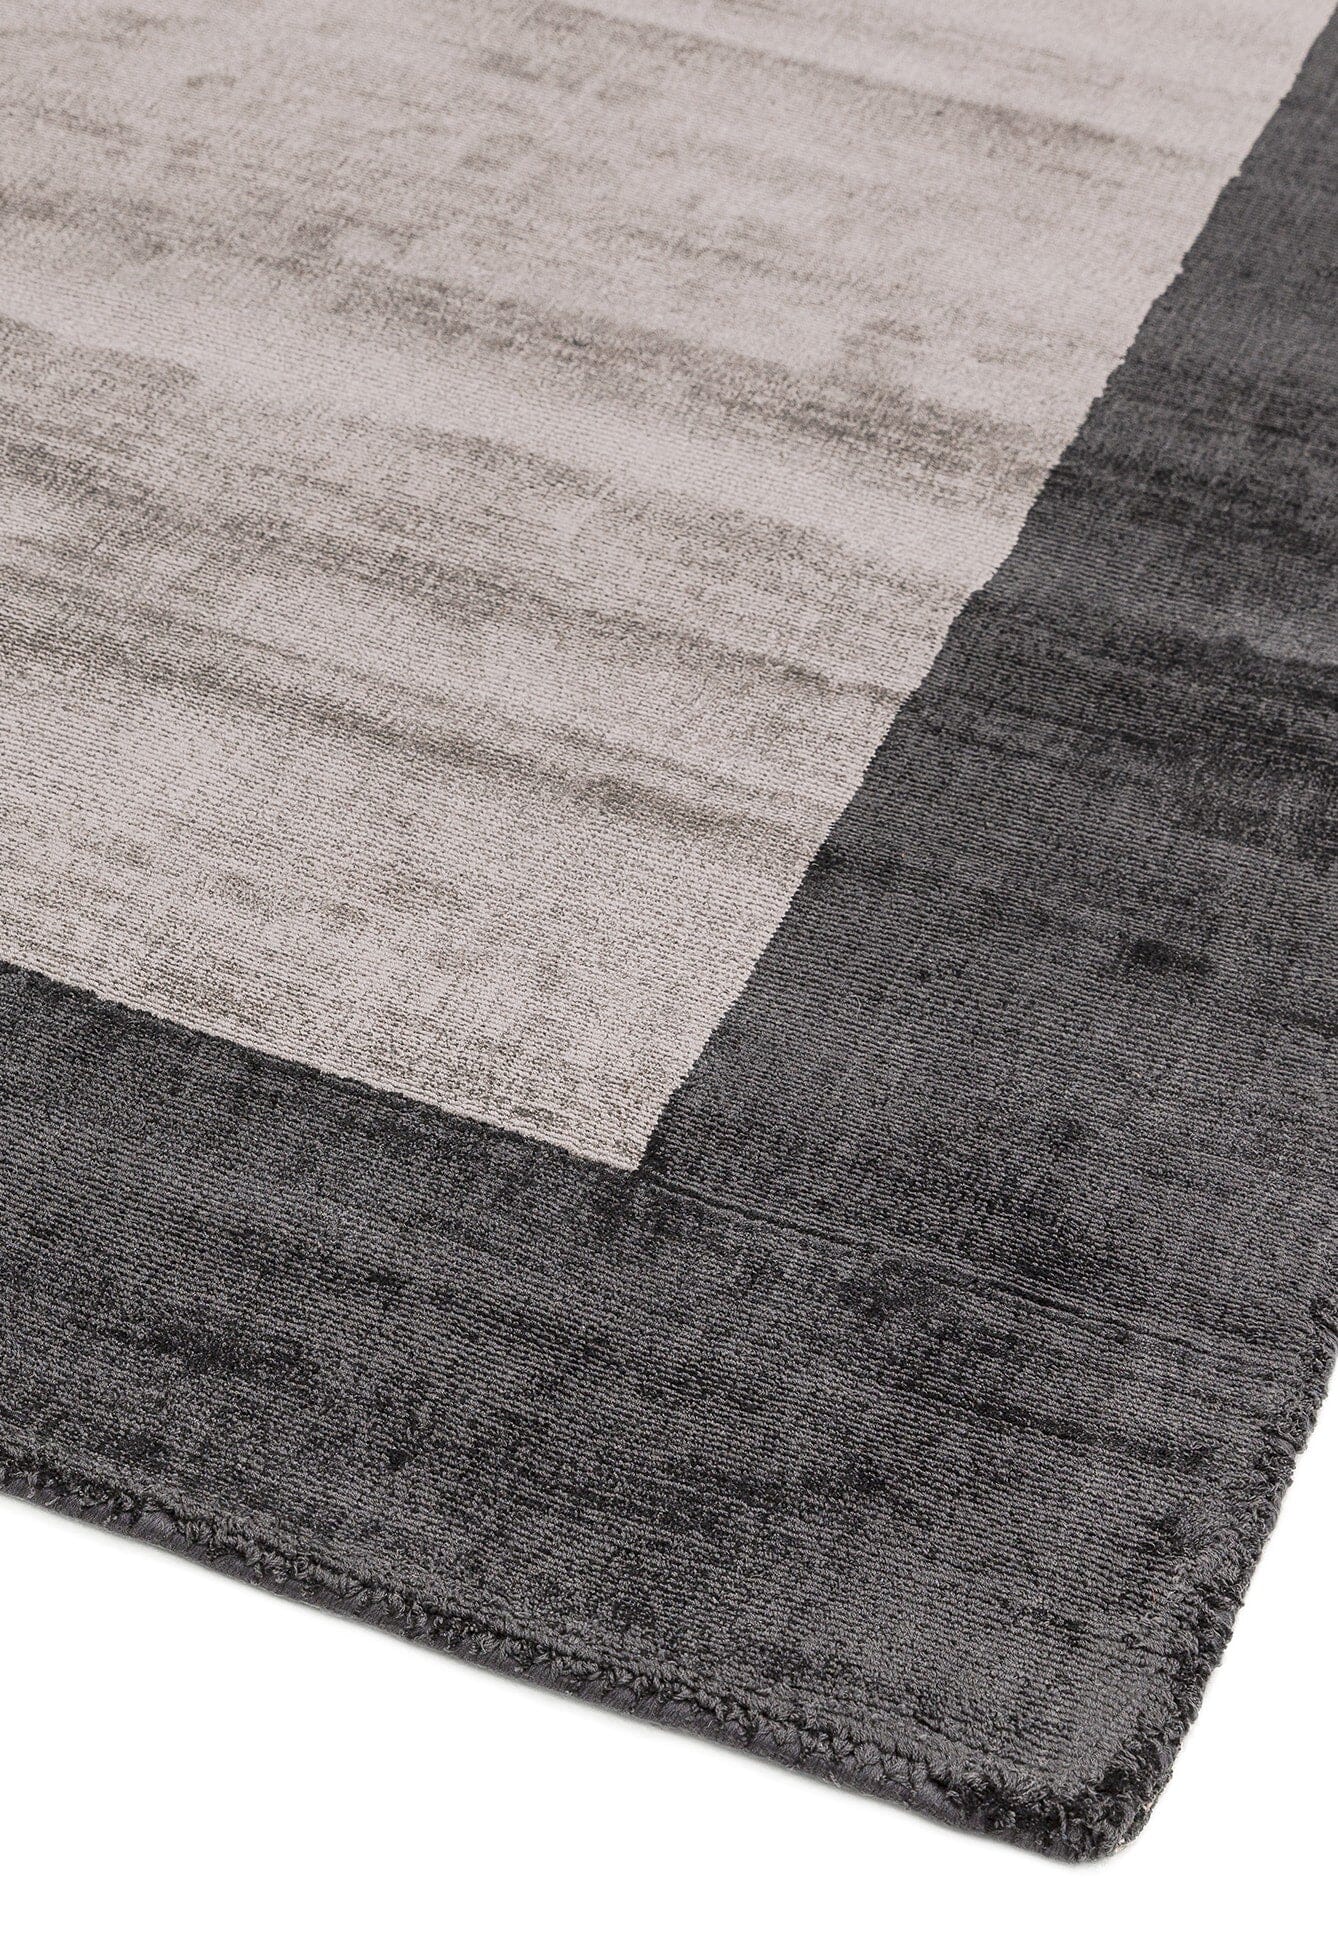  Asiatic Carpets-Asiatic Carpets Blade Hand Woven Rug Charcoal Silver - 120 x 170cm-Grey, Silver 573 